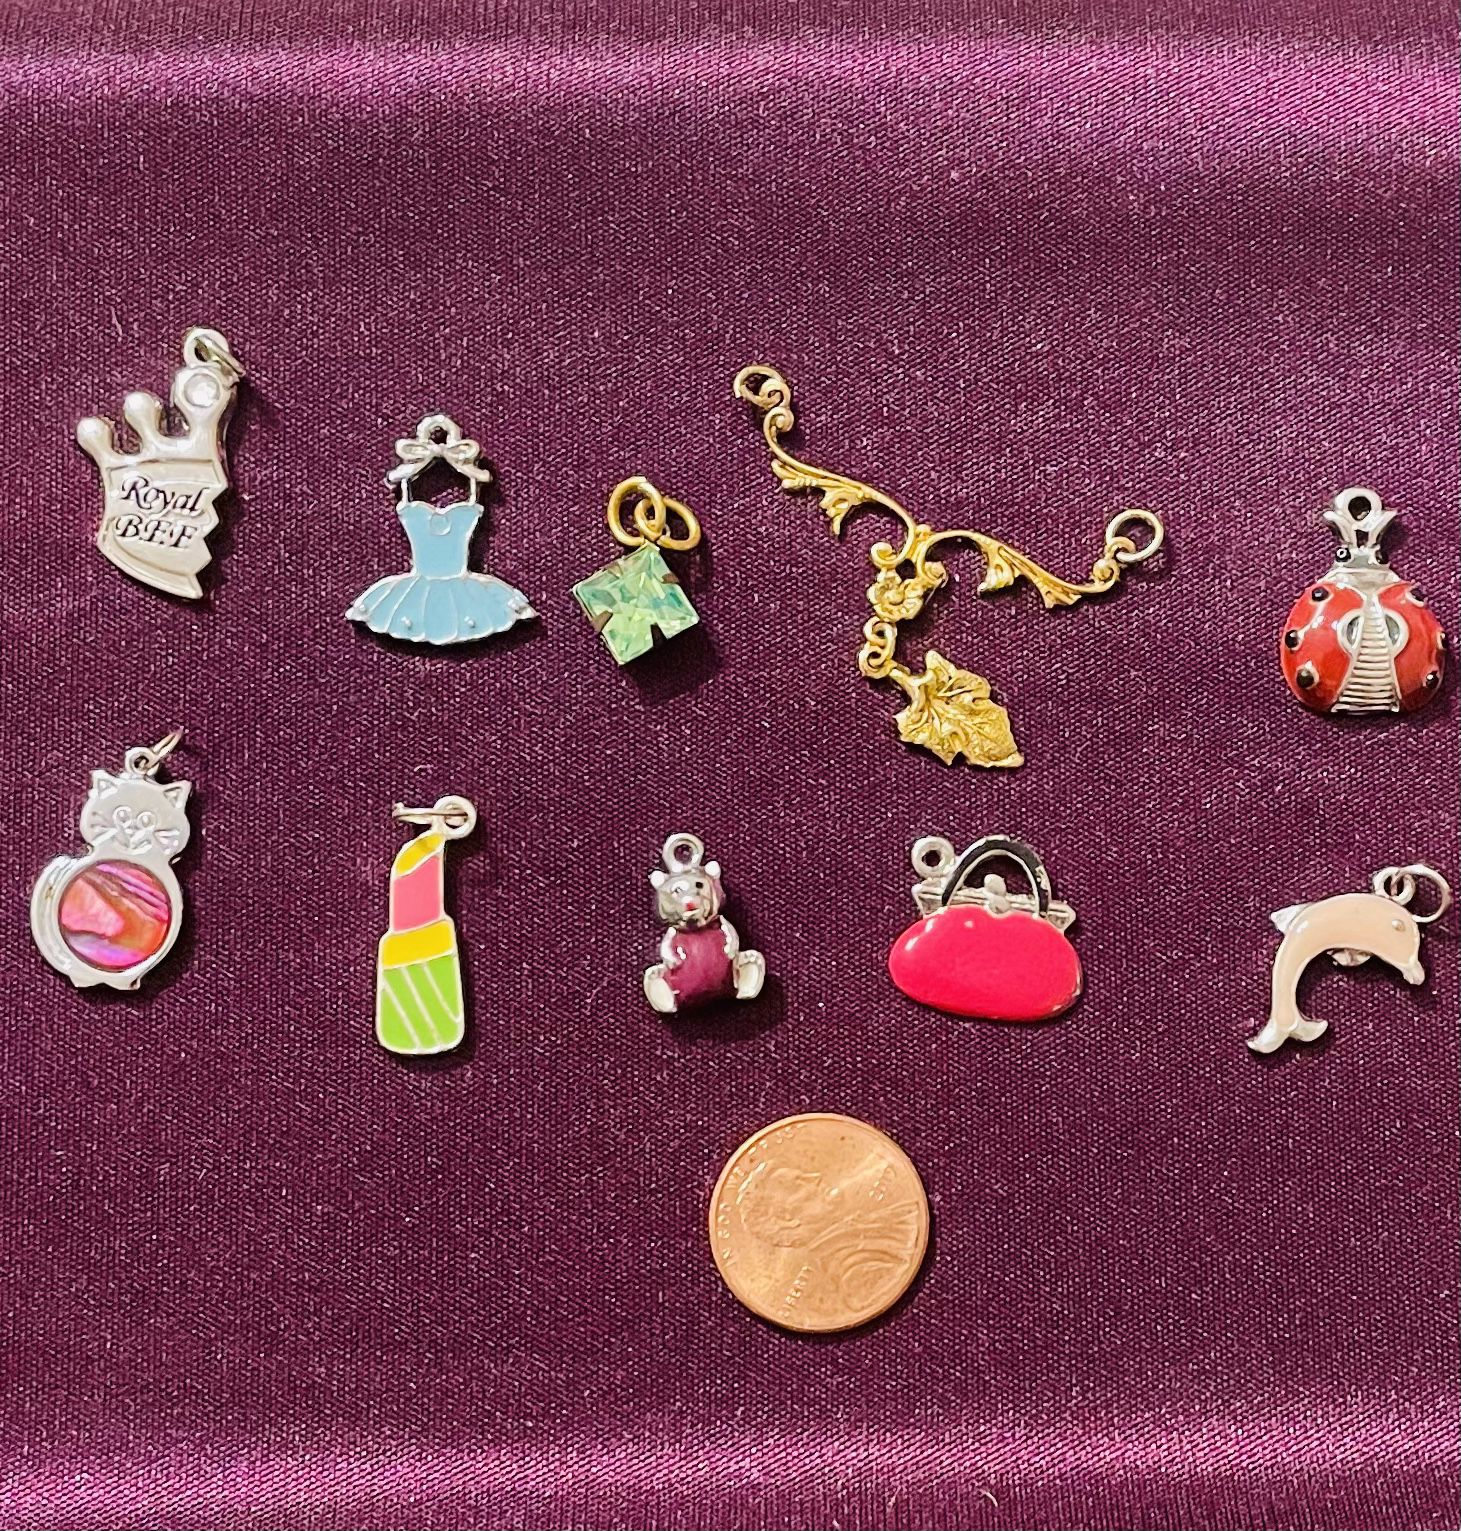 10 Charms/pendents, All For $3